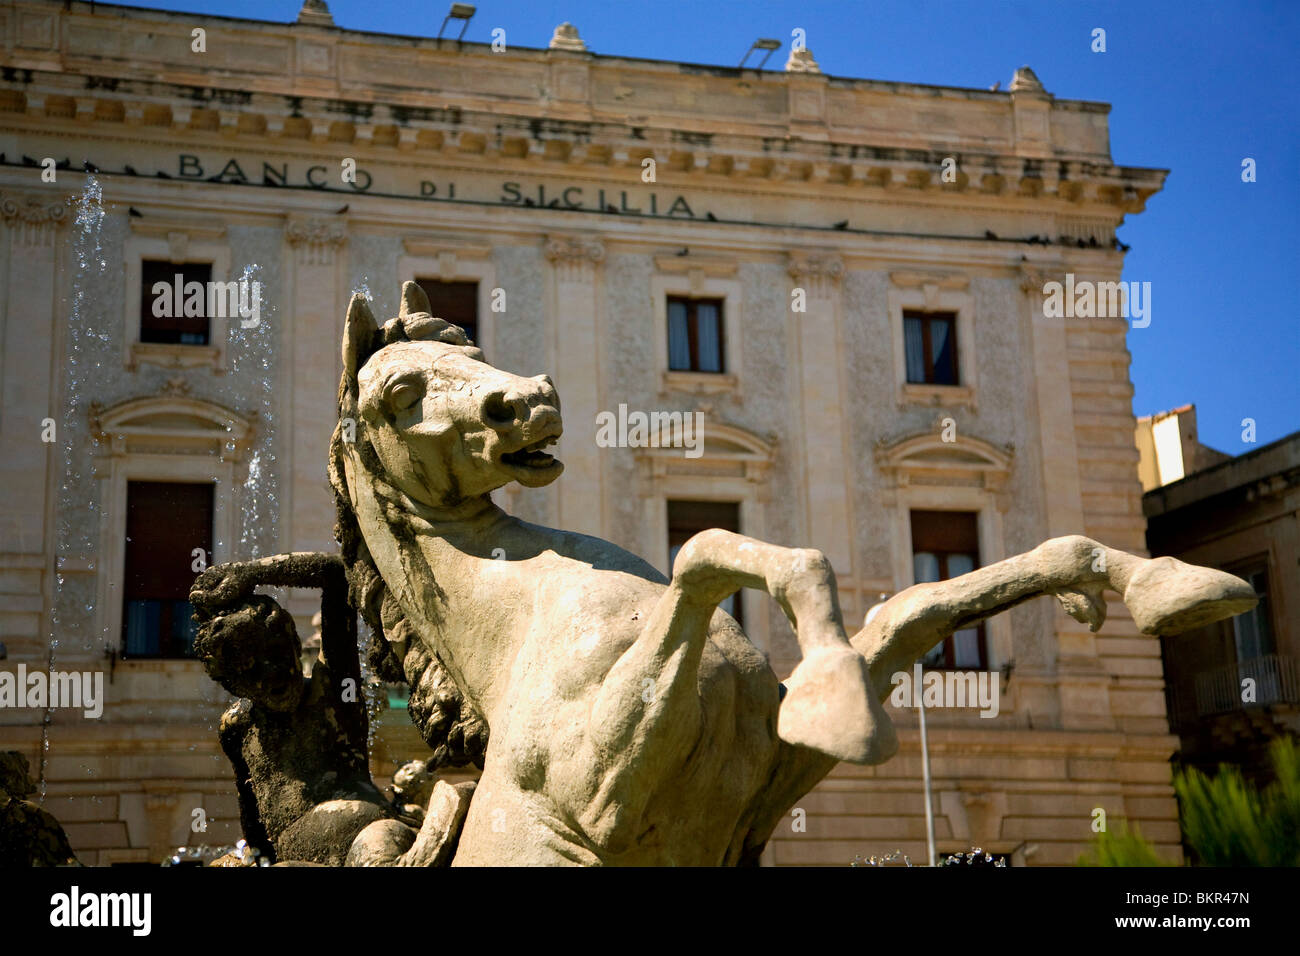 Italy, Sicily, Siracuse, Ortygia; A sculpture of a horse, part of the fountain in a square in Ortygia Stock Photo